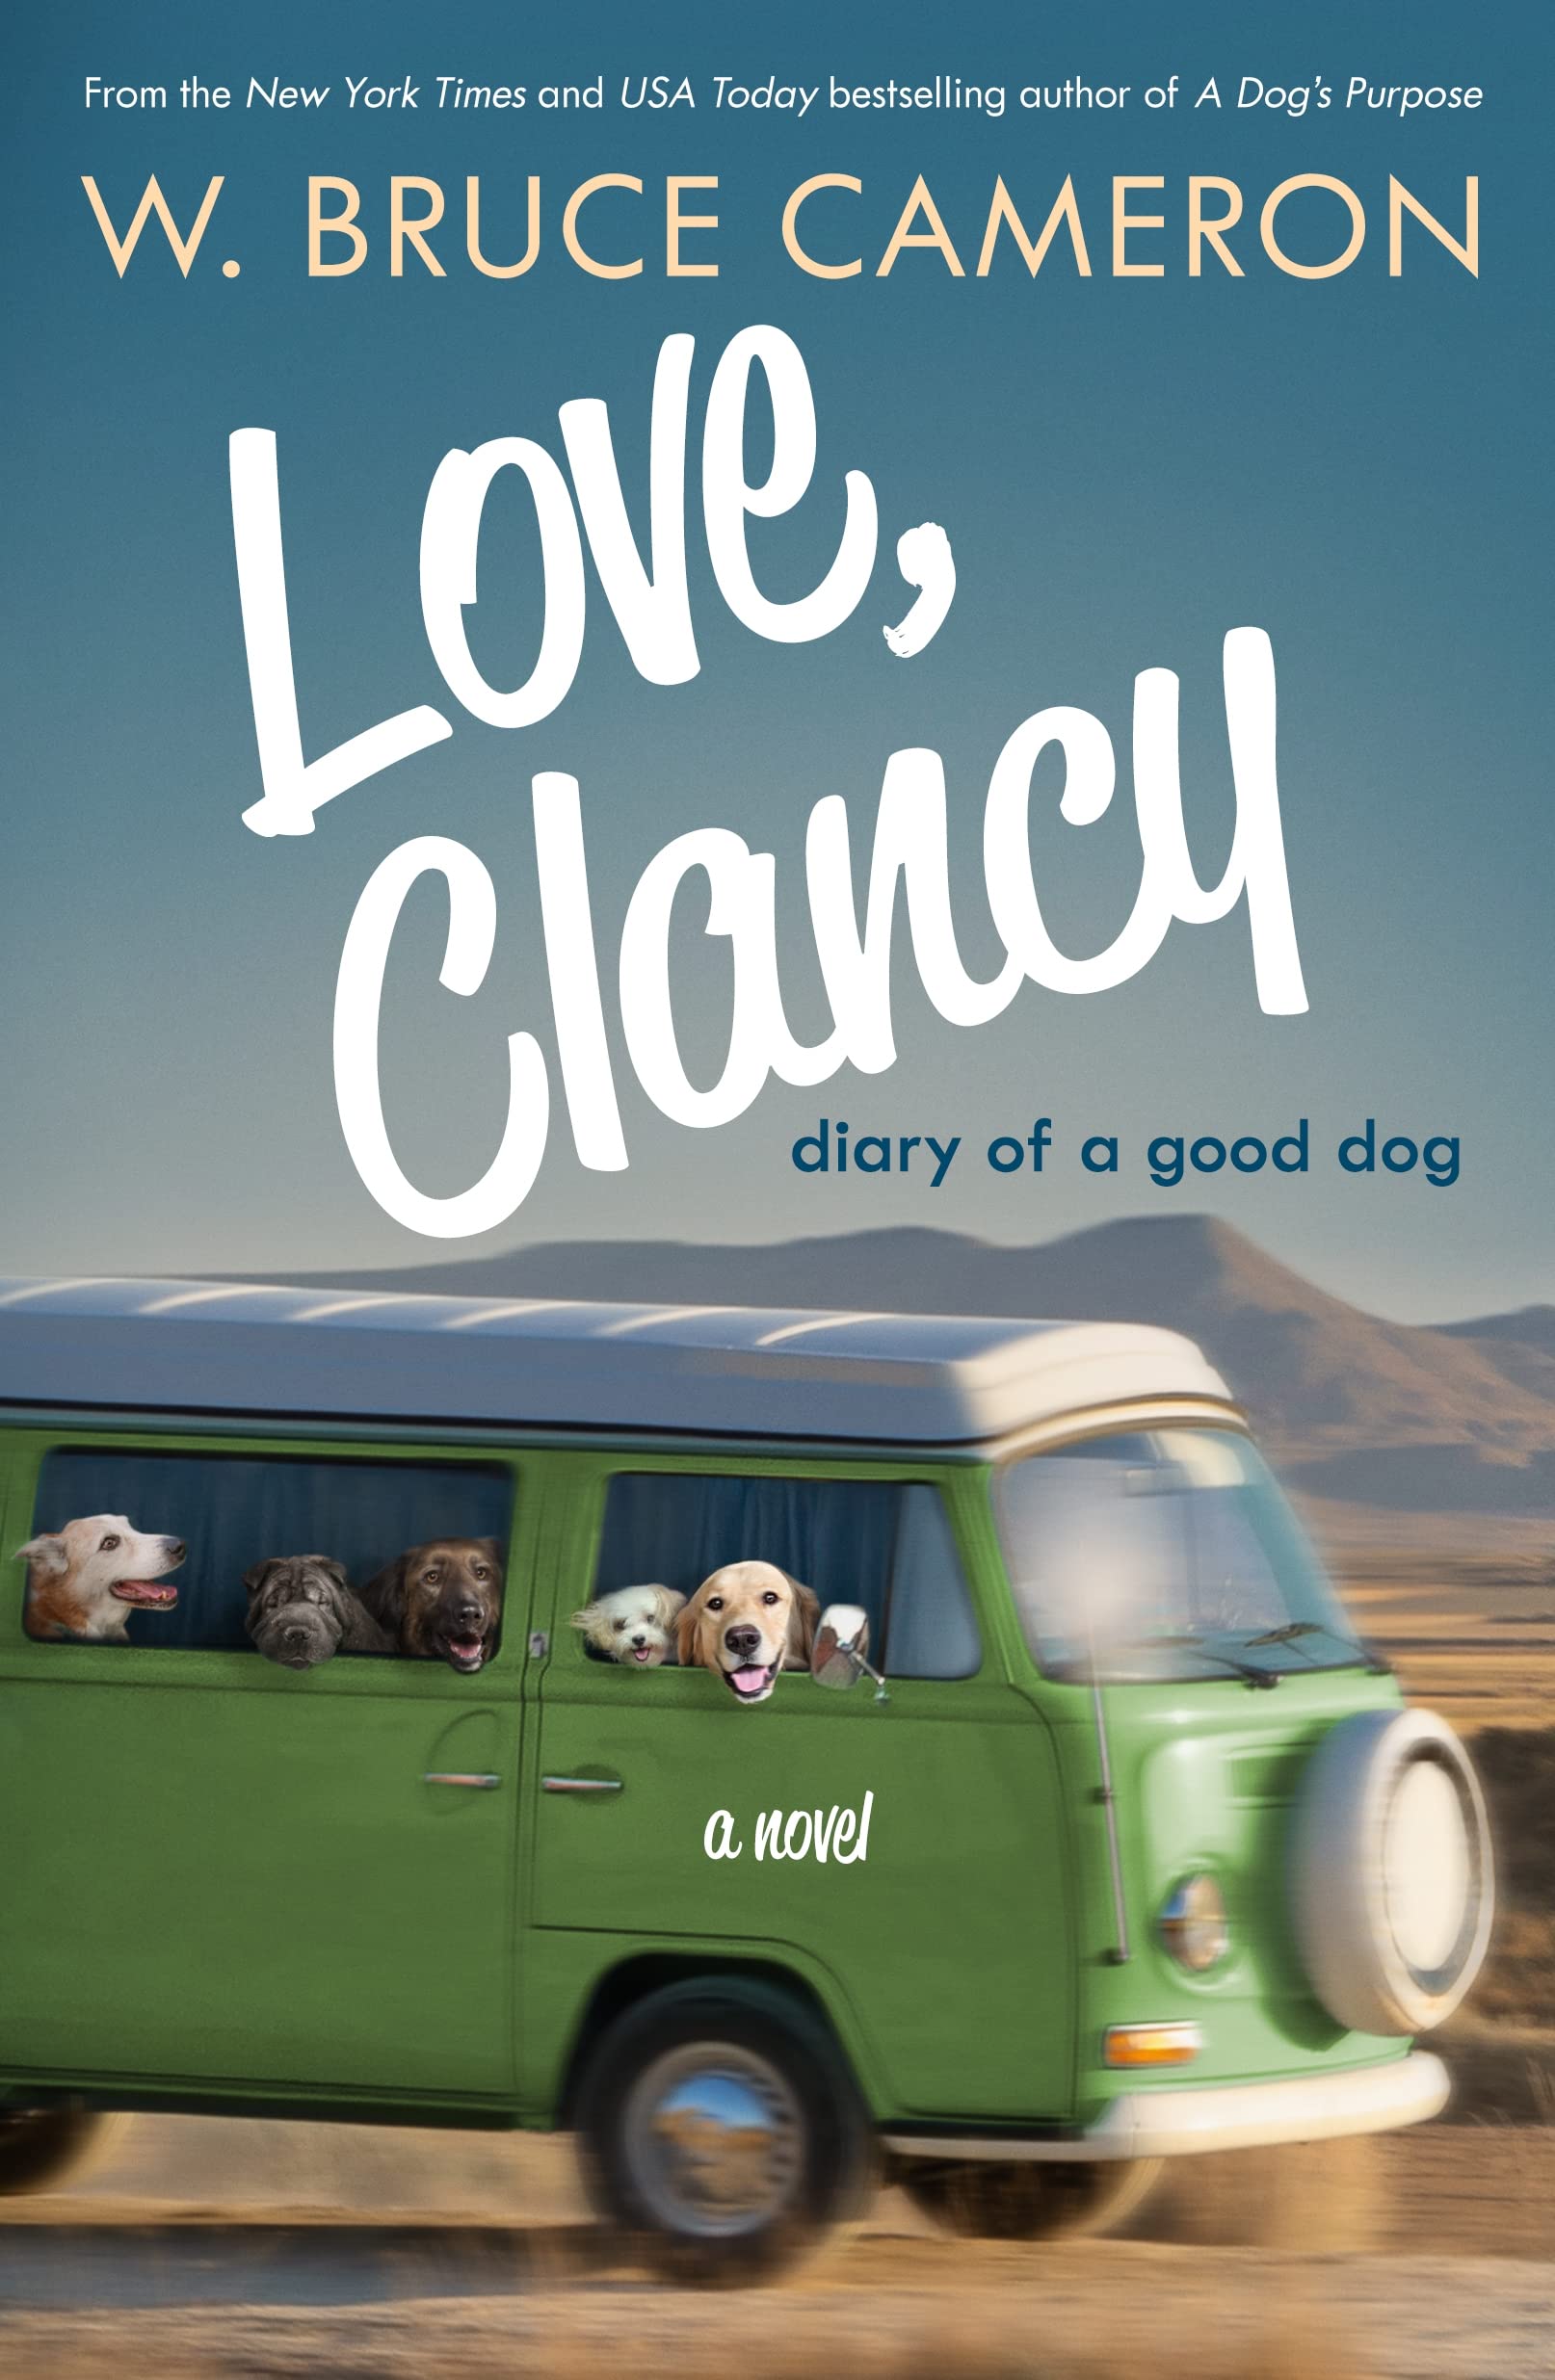 W. Bruce Cameron to Participate in the Kentucky Book Festival with “Love, Clancy: Diary of a Good Dog”